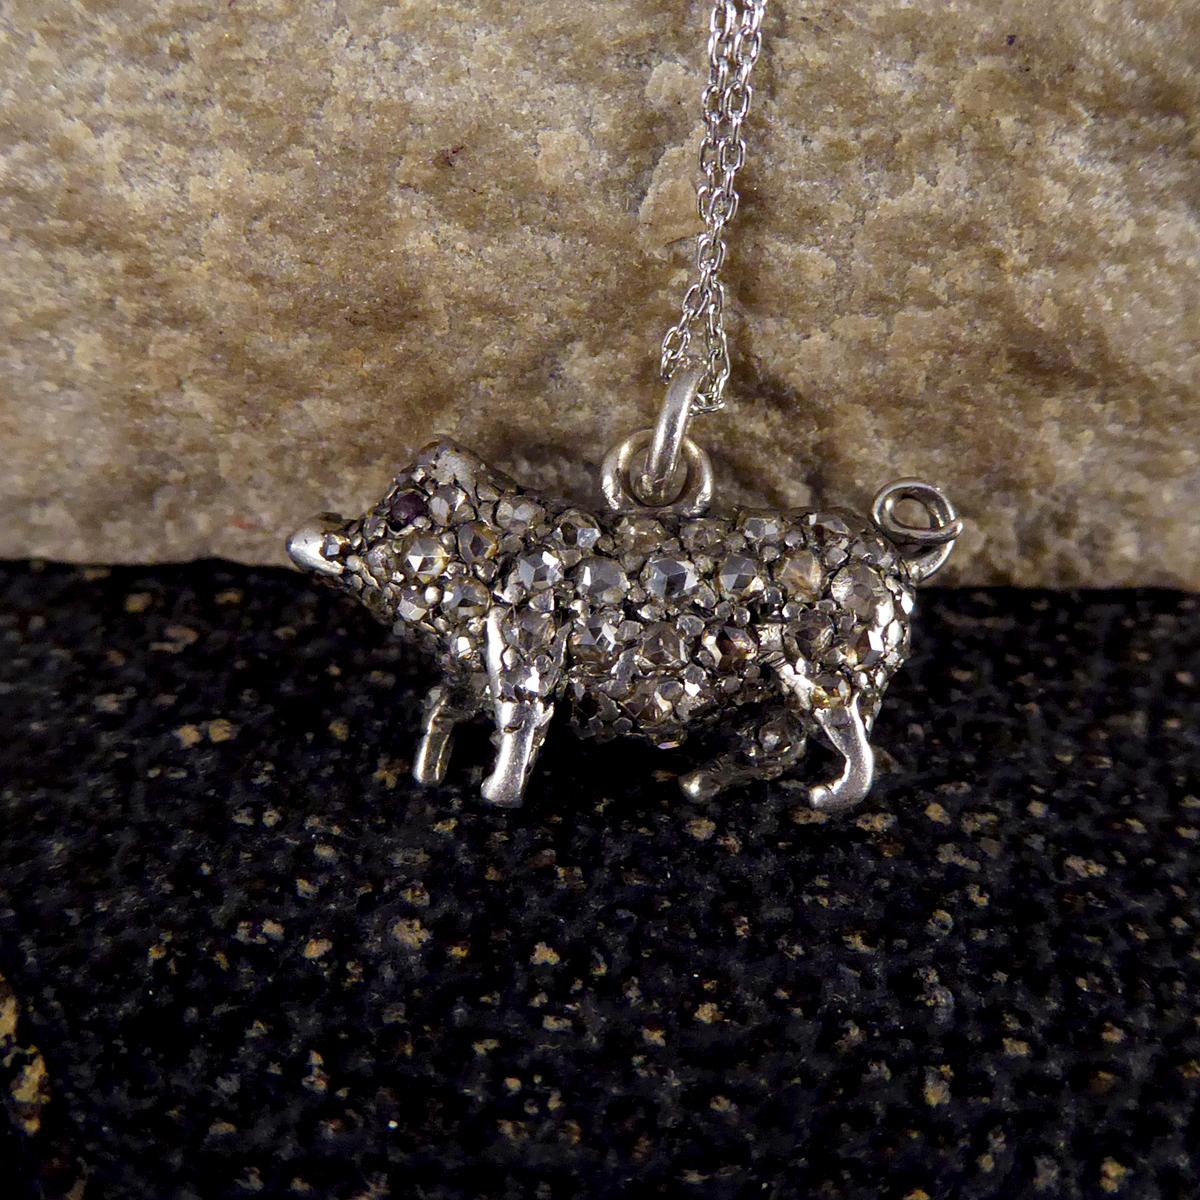 This gorgeous quality and unusual antique pendant depicts a Pig crafted fully from Silver and is fully adorned (front and back) with Rose Cut Diamonds and Rubies for eyes. This Pig was hand crafted with such detail in the Late Victorian era with all